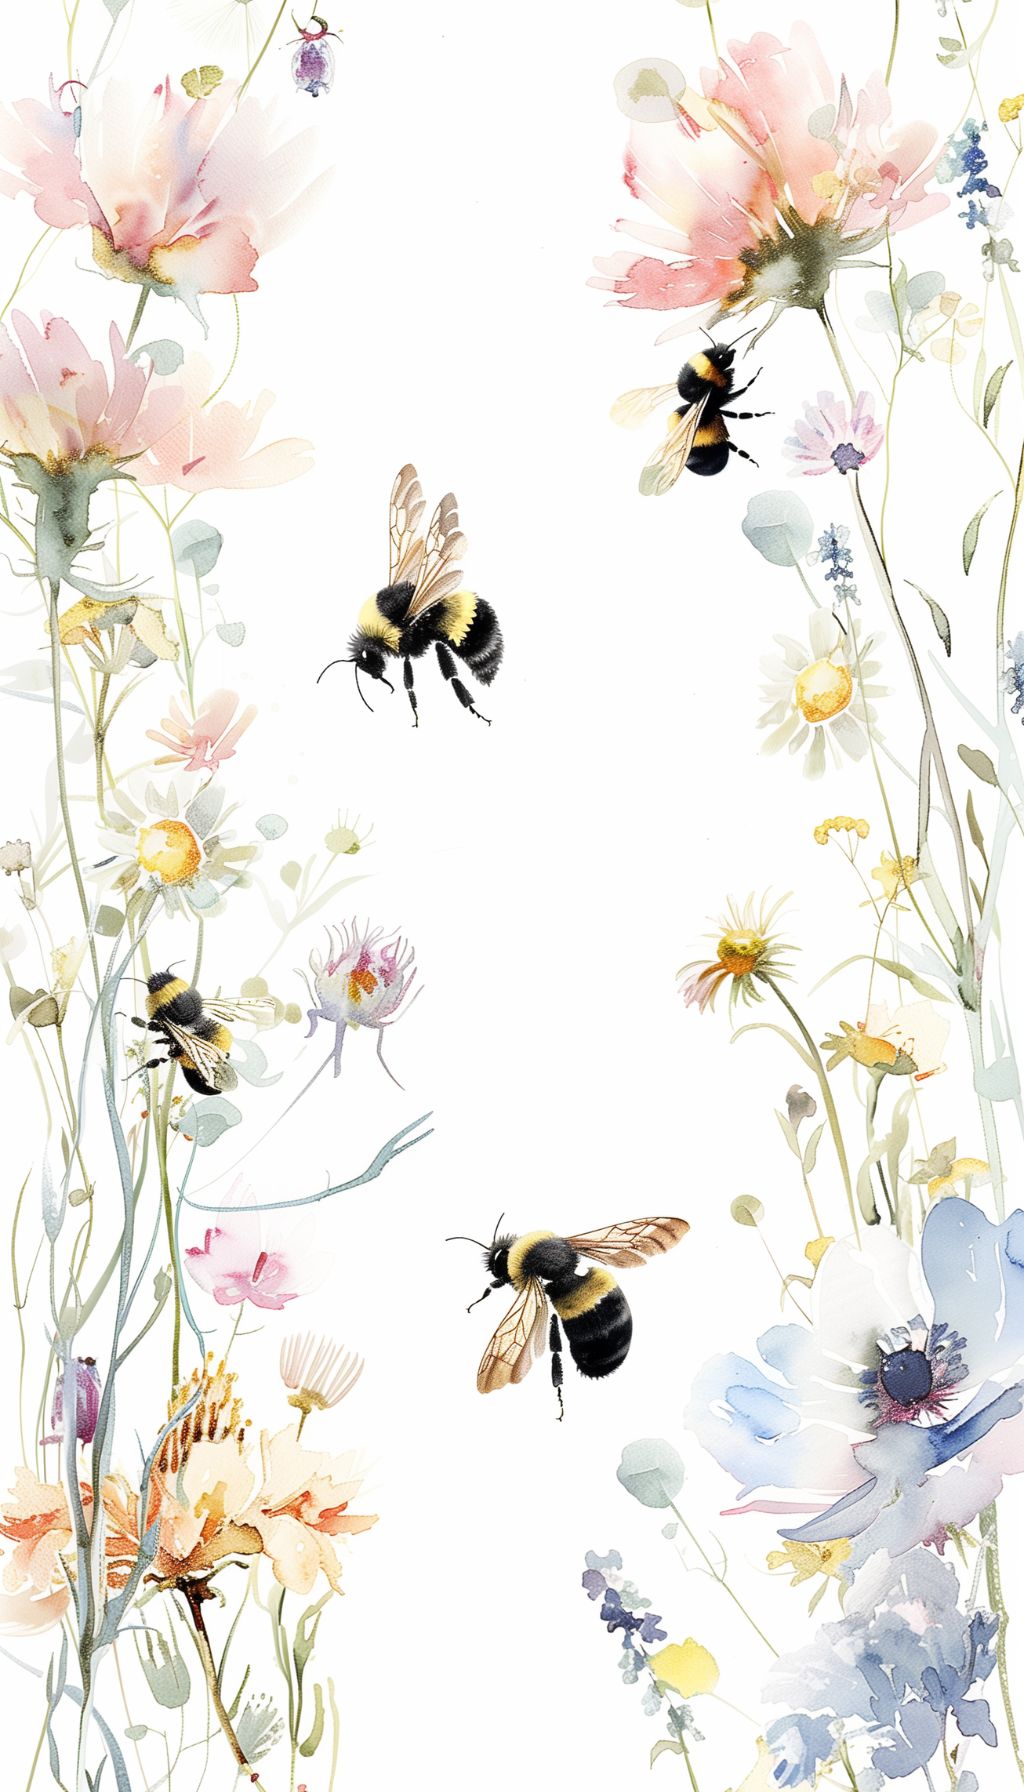 Watercolor iPhone wallpaper displaying summer flowers in pastel colors with detailed bumblebees in mid-flight, suitable for phone backgrounds and lock screens.